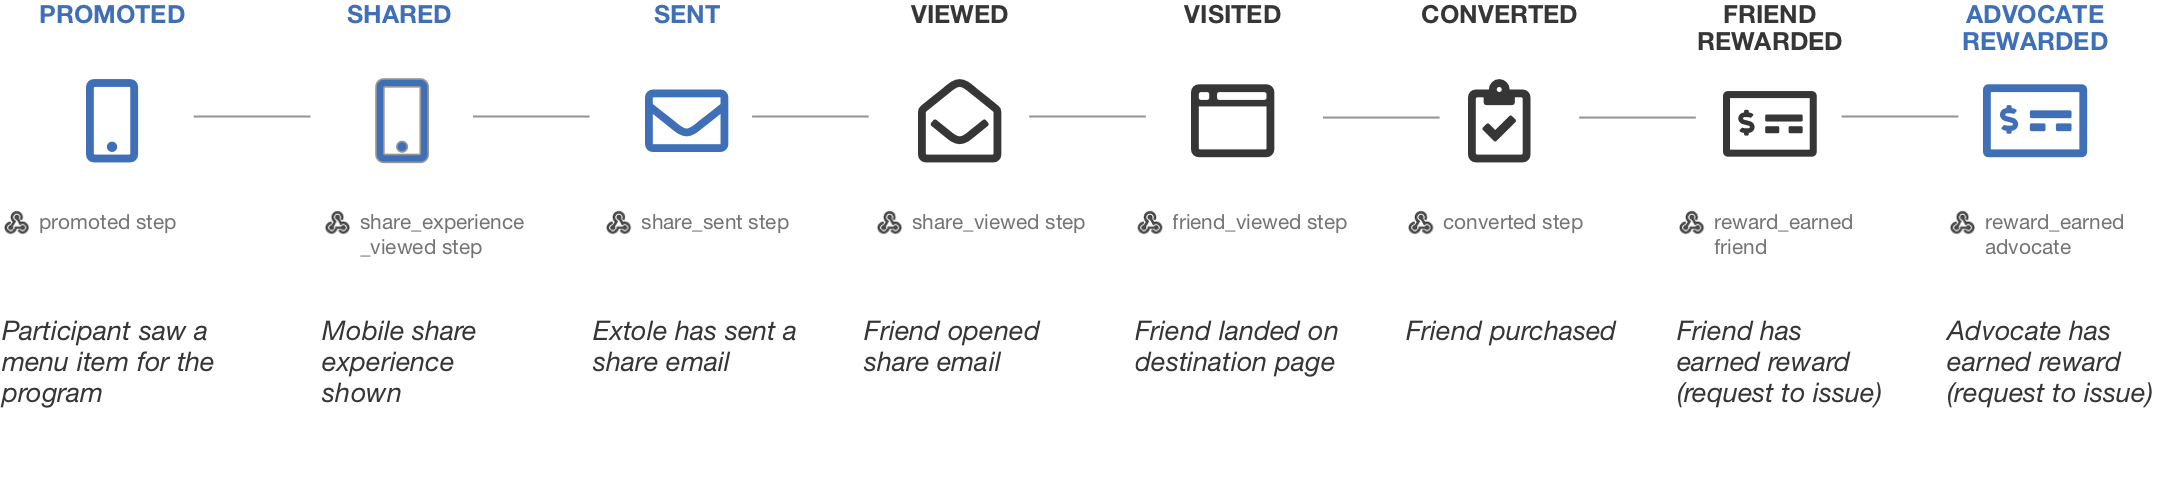 Customer webhooks in the context of a sample journey.